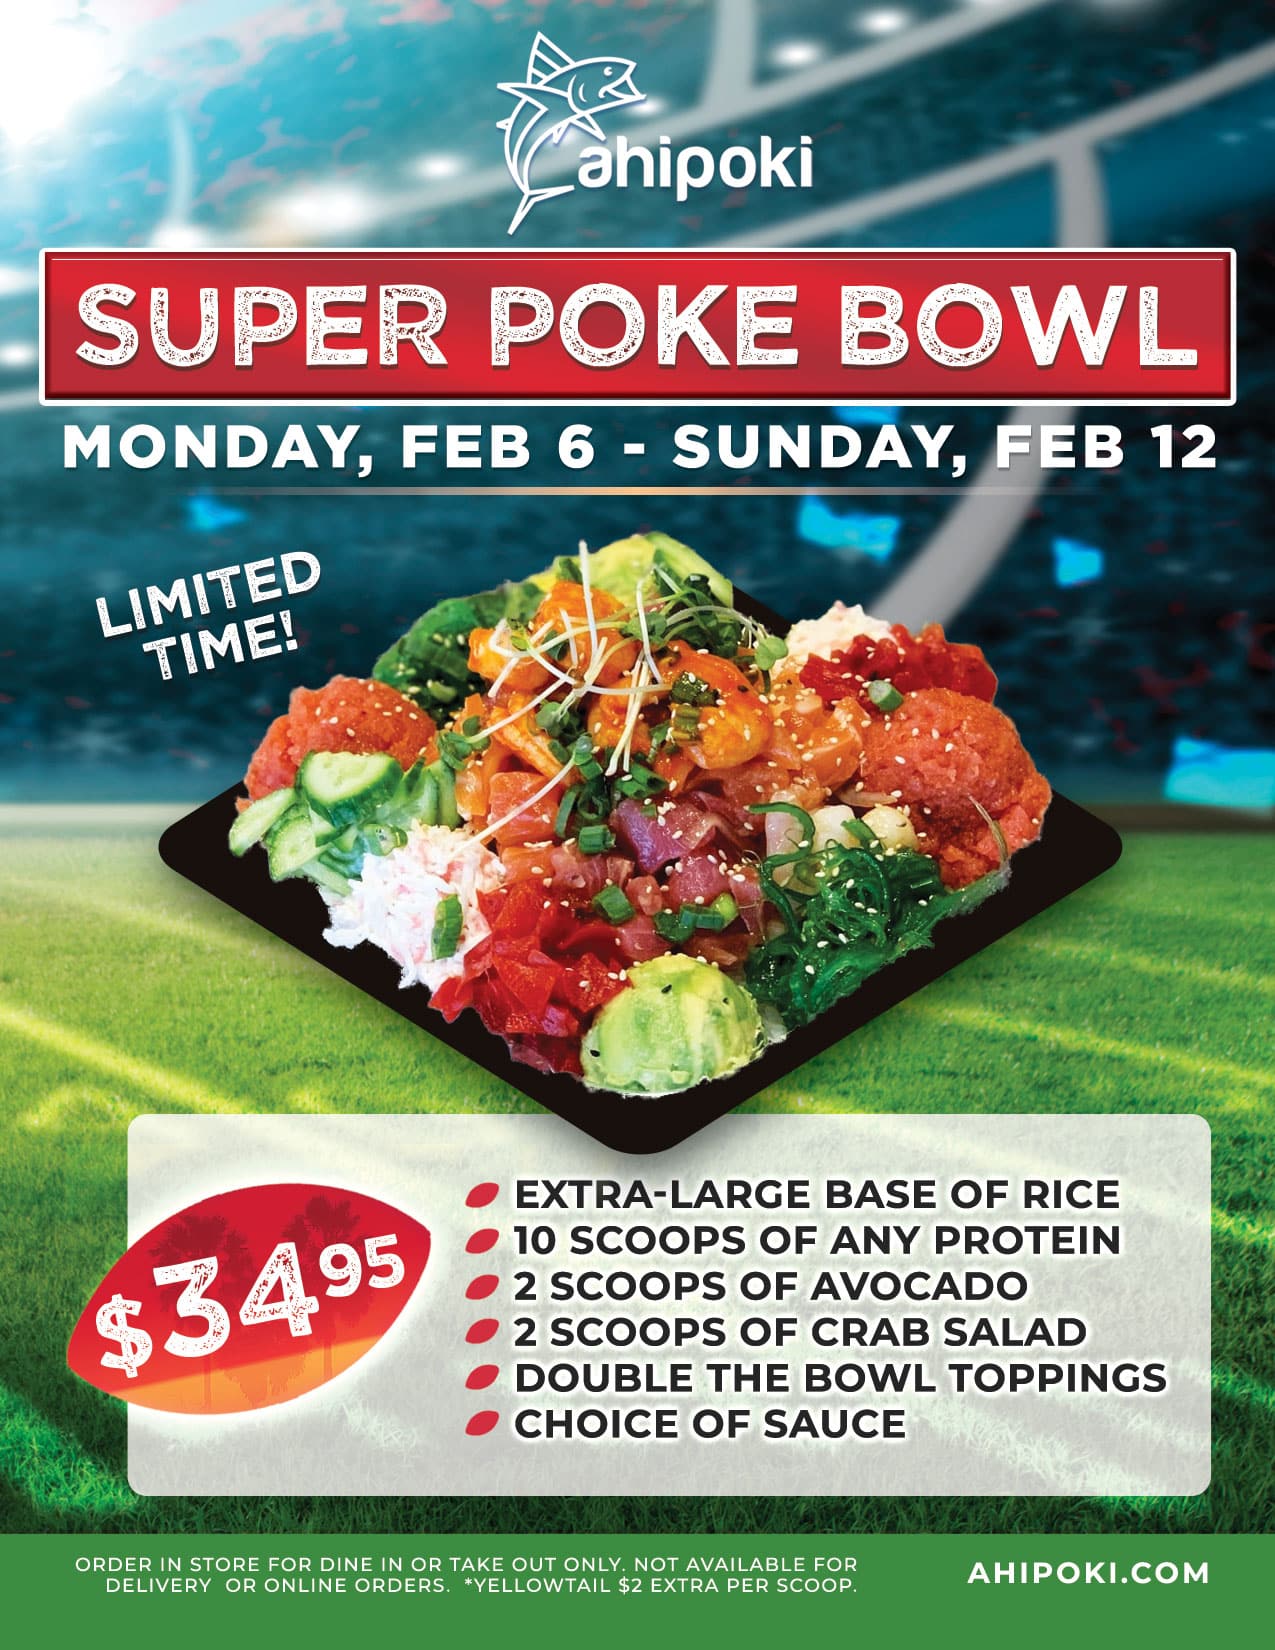 A flyer for the super poke bowl.